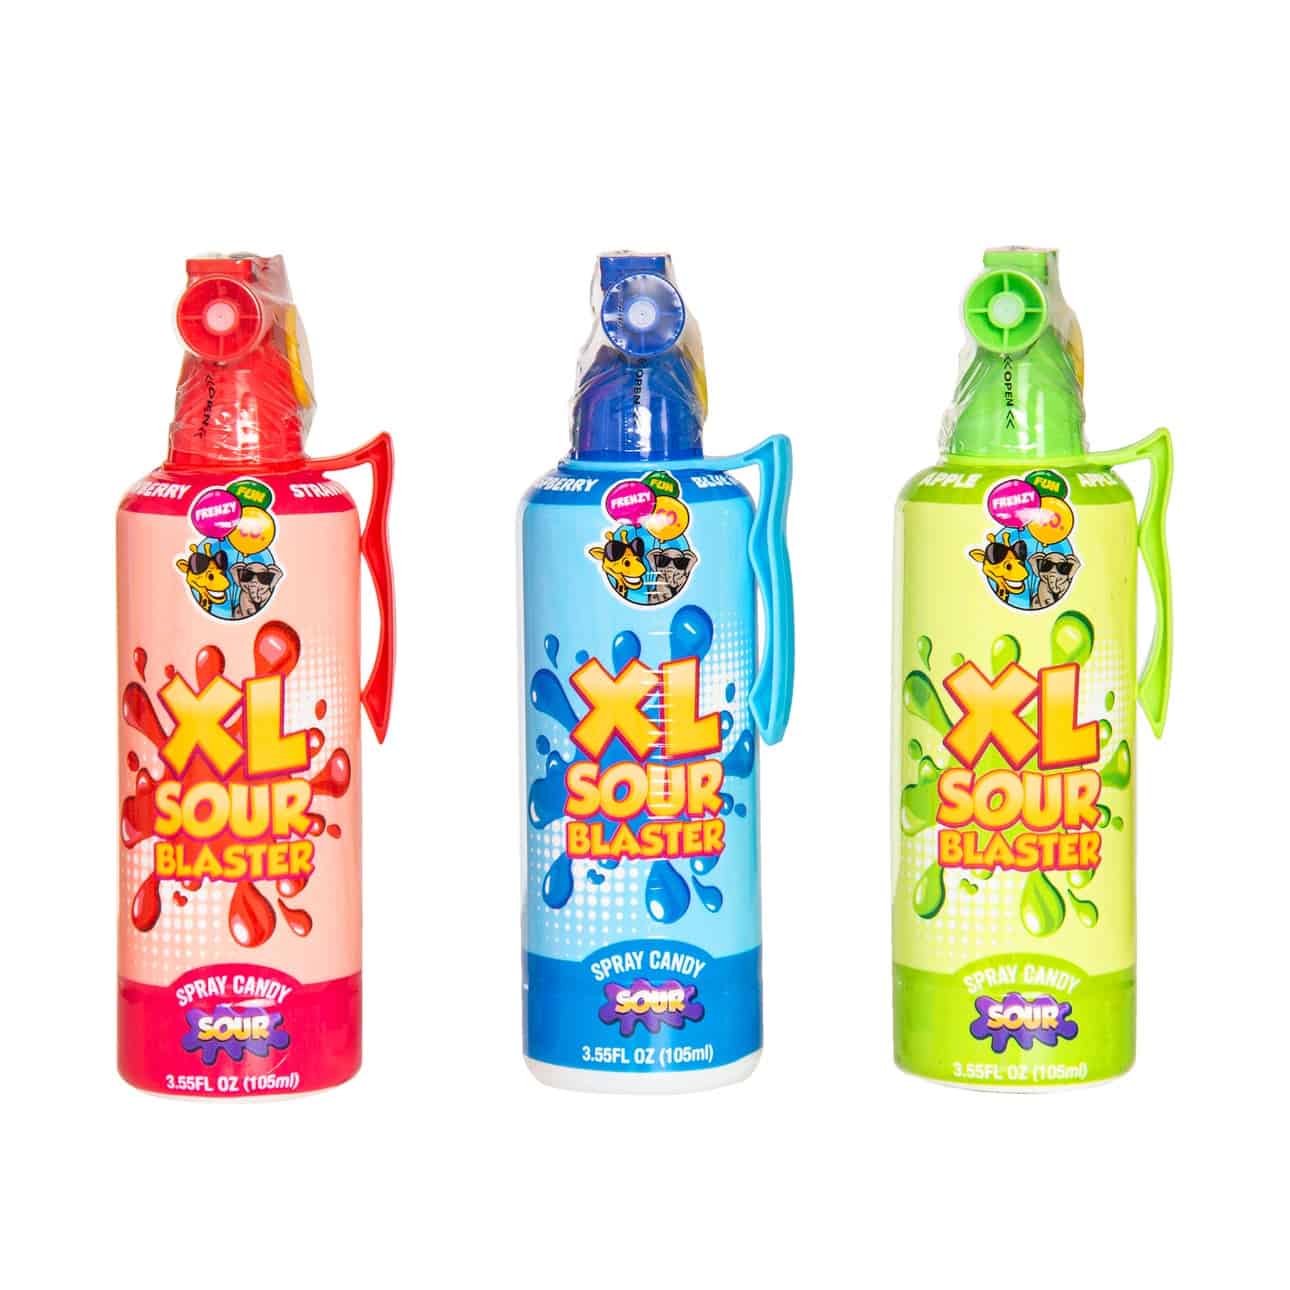 XL Sour Blaster Spray Candy Assorted - 105ml - Dollars and Sense